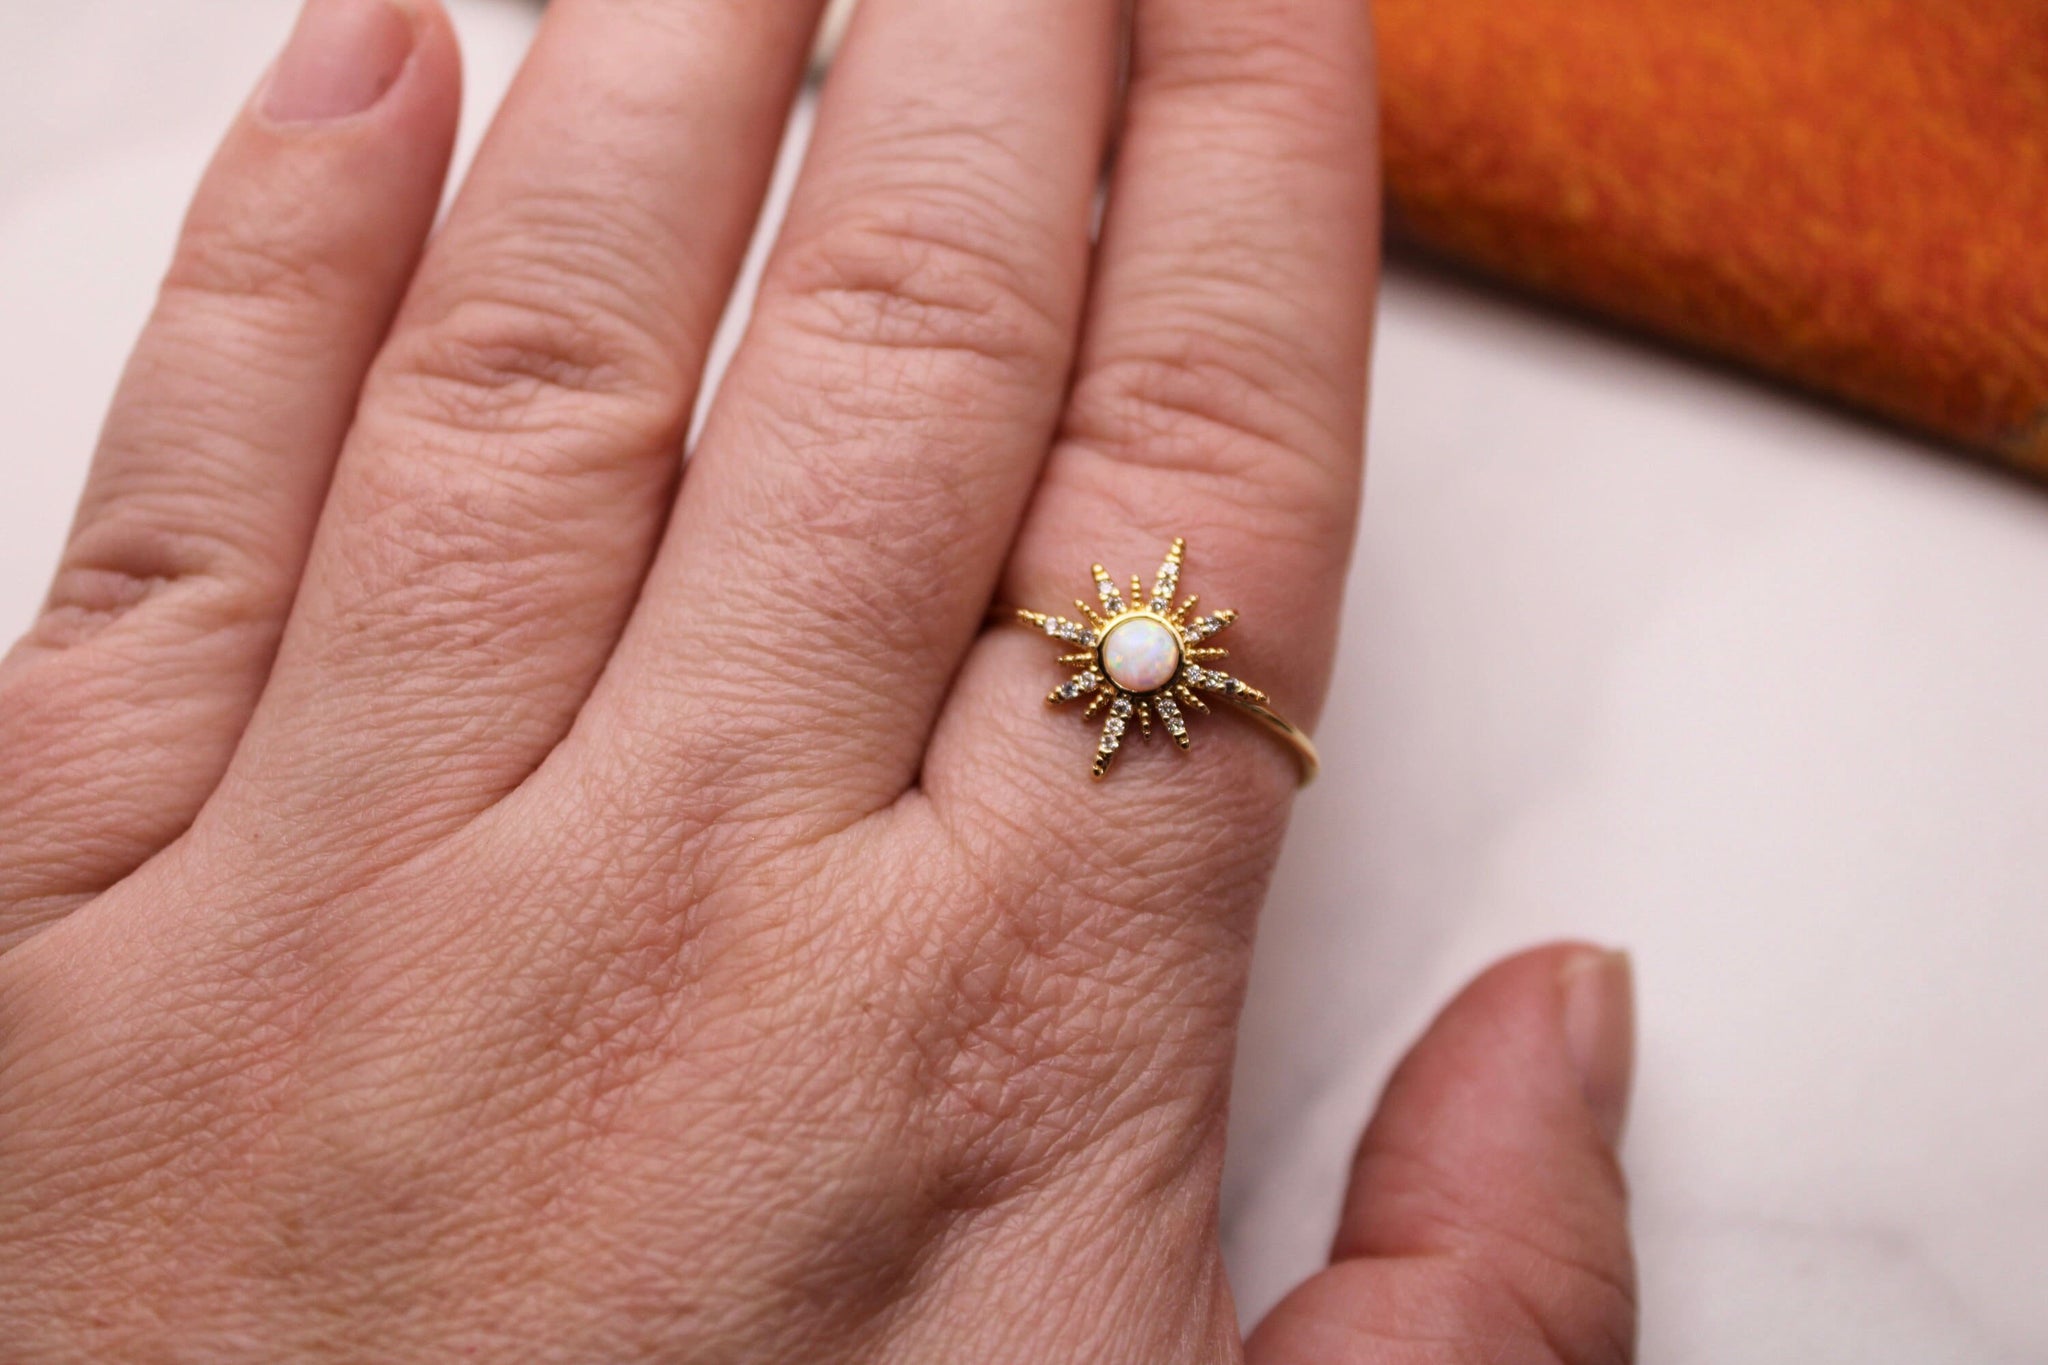 opal star ring, opal birth stone, adjustable ring, gold ring, jewelry, gift, gift for her, summer jewelry, starburst ring, sun, sun jewelry